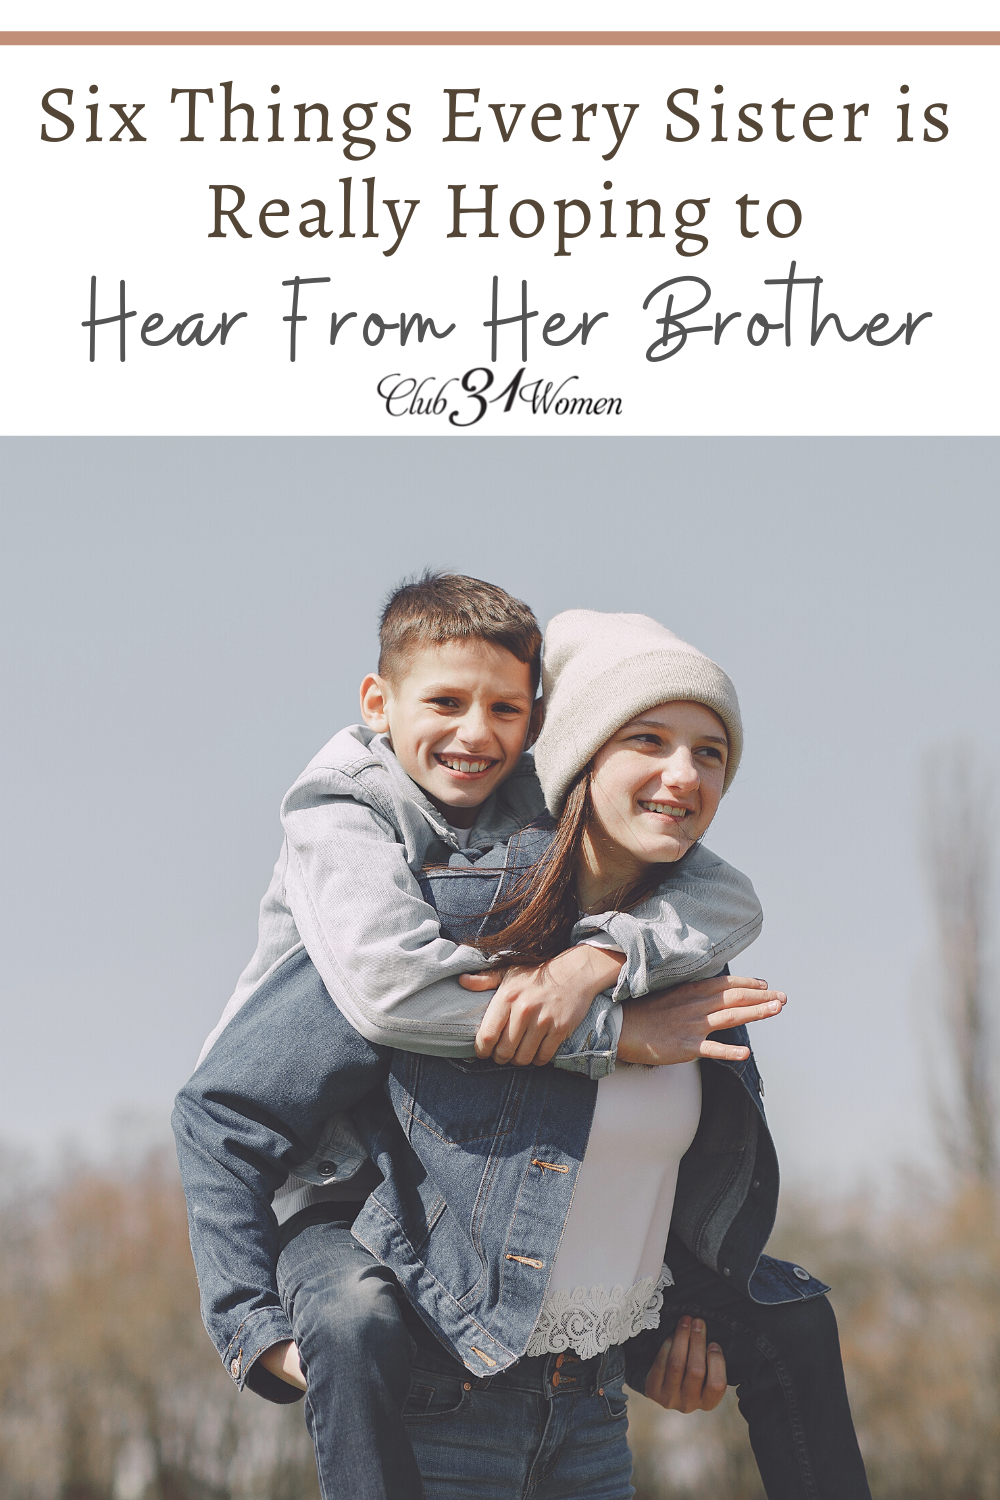 There are some great ways we can help build up our children's sibling relationships. Here are some ways your boys can care for their sisters. via @Club31Women